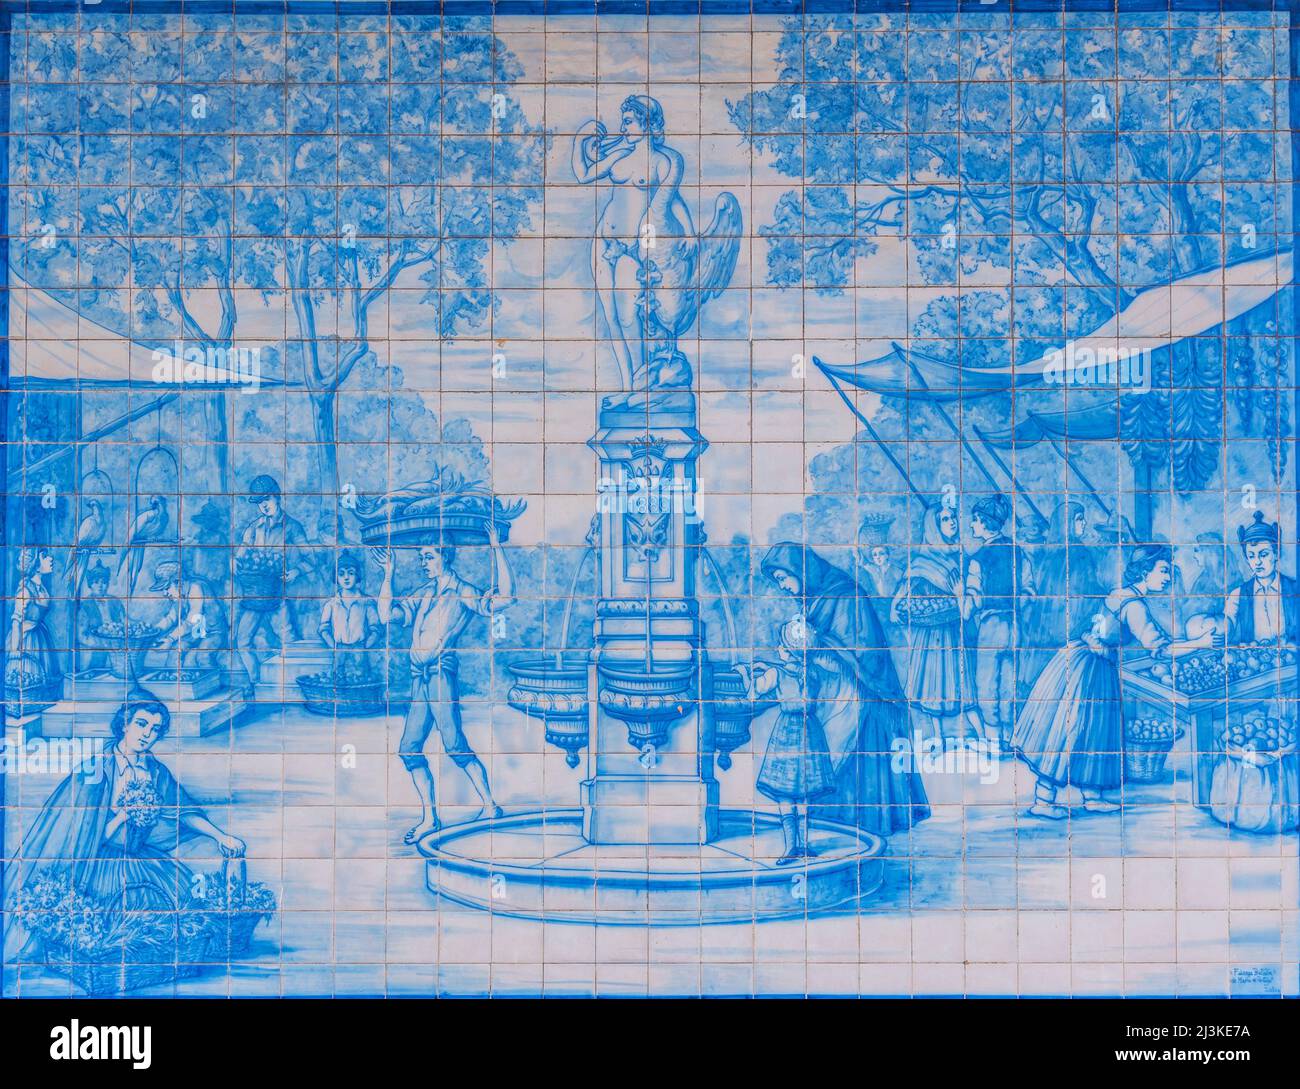 Funchal, Portugal, June 12, 2021: Azulejo mosaic at Mercado dos Lavradores in Portuguese town Funchal. Stock Photo